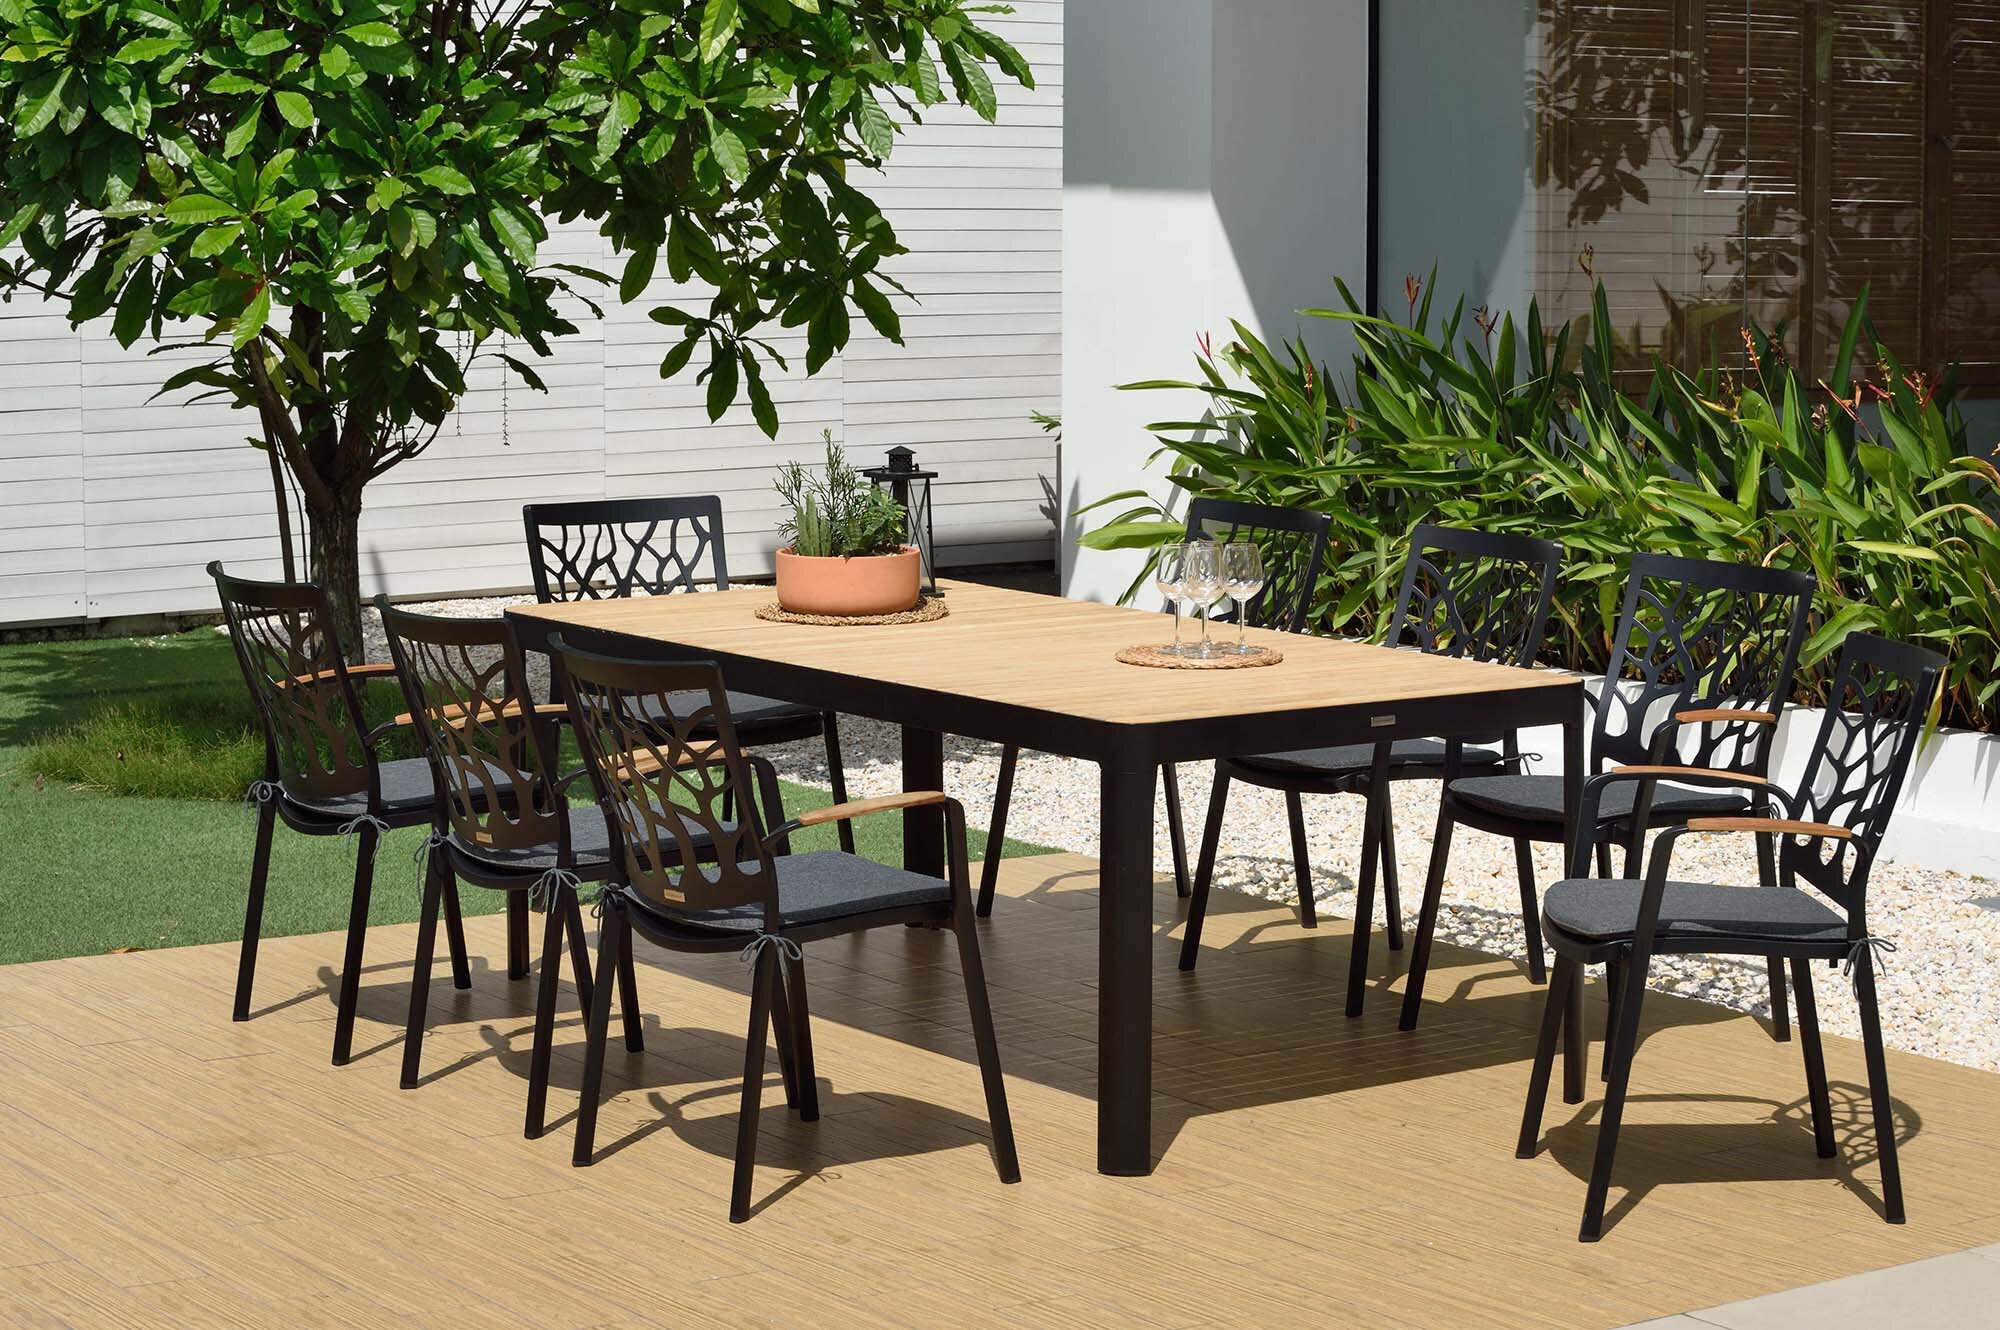 Portals dining table - Outdoor